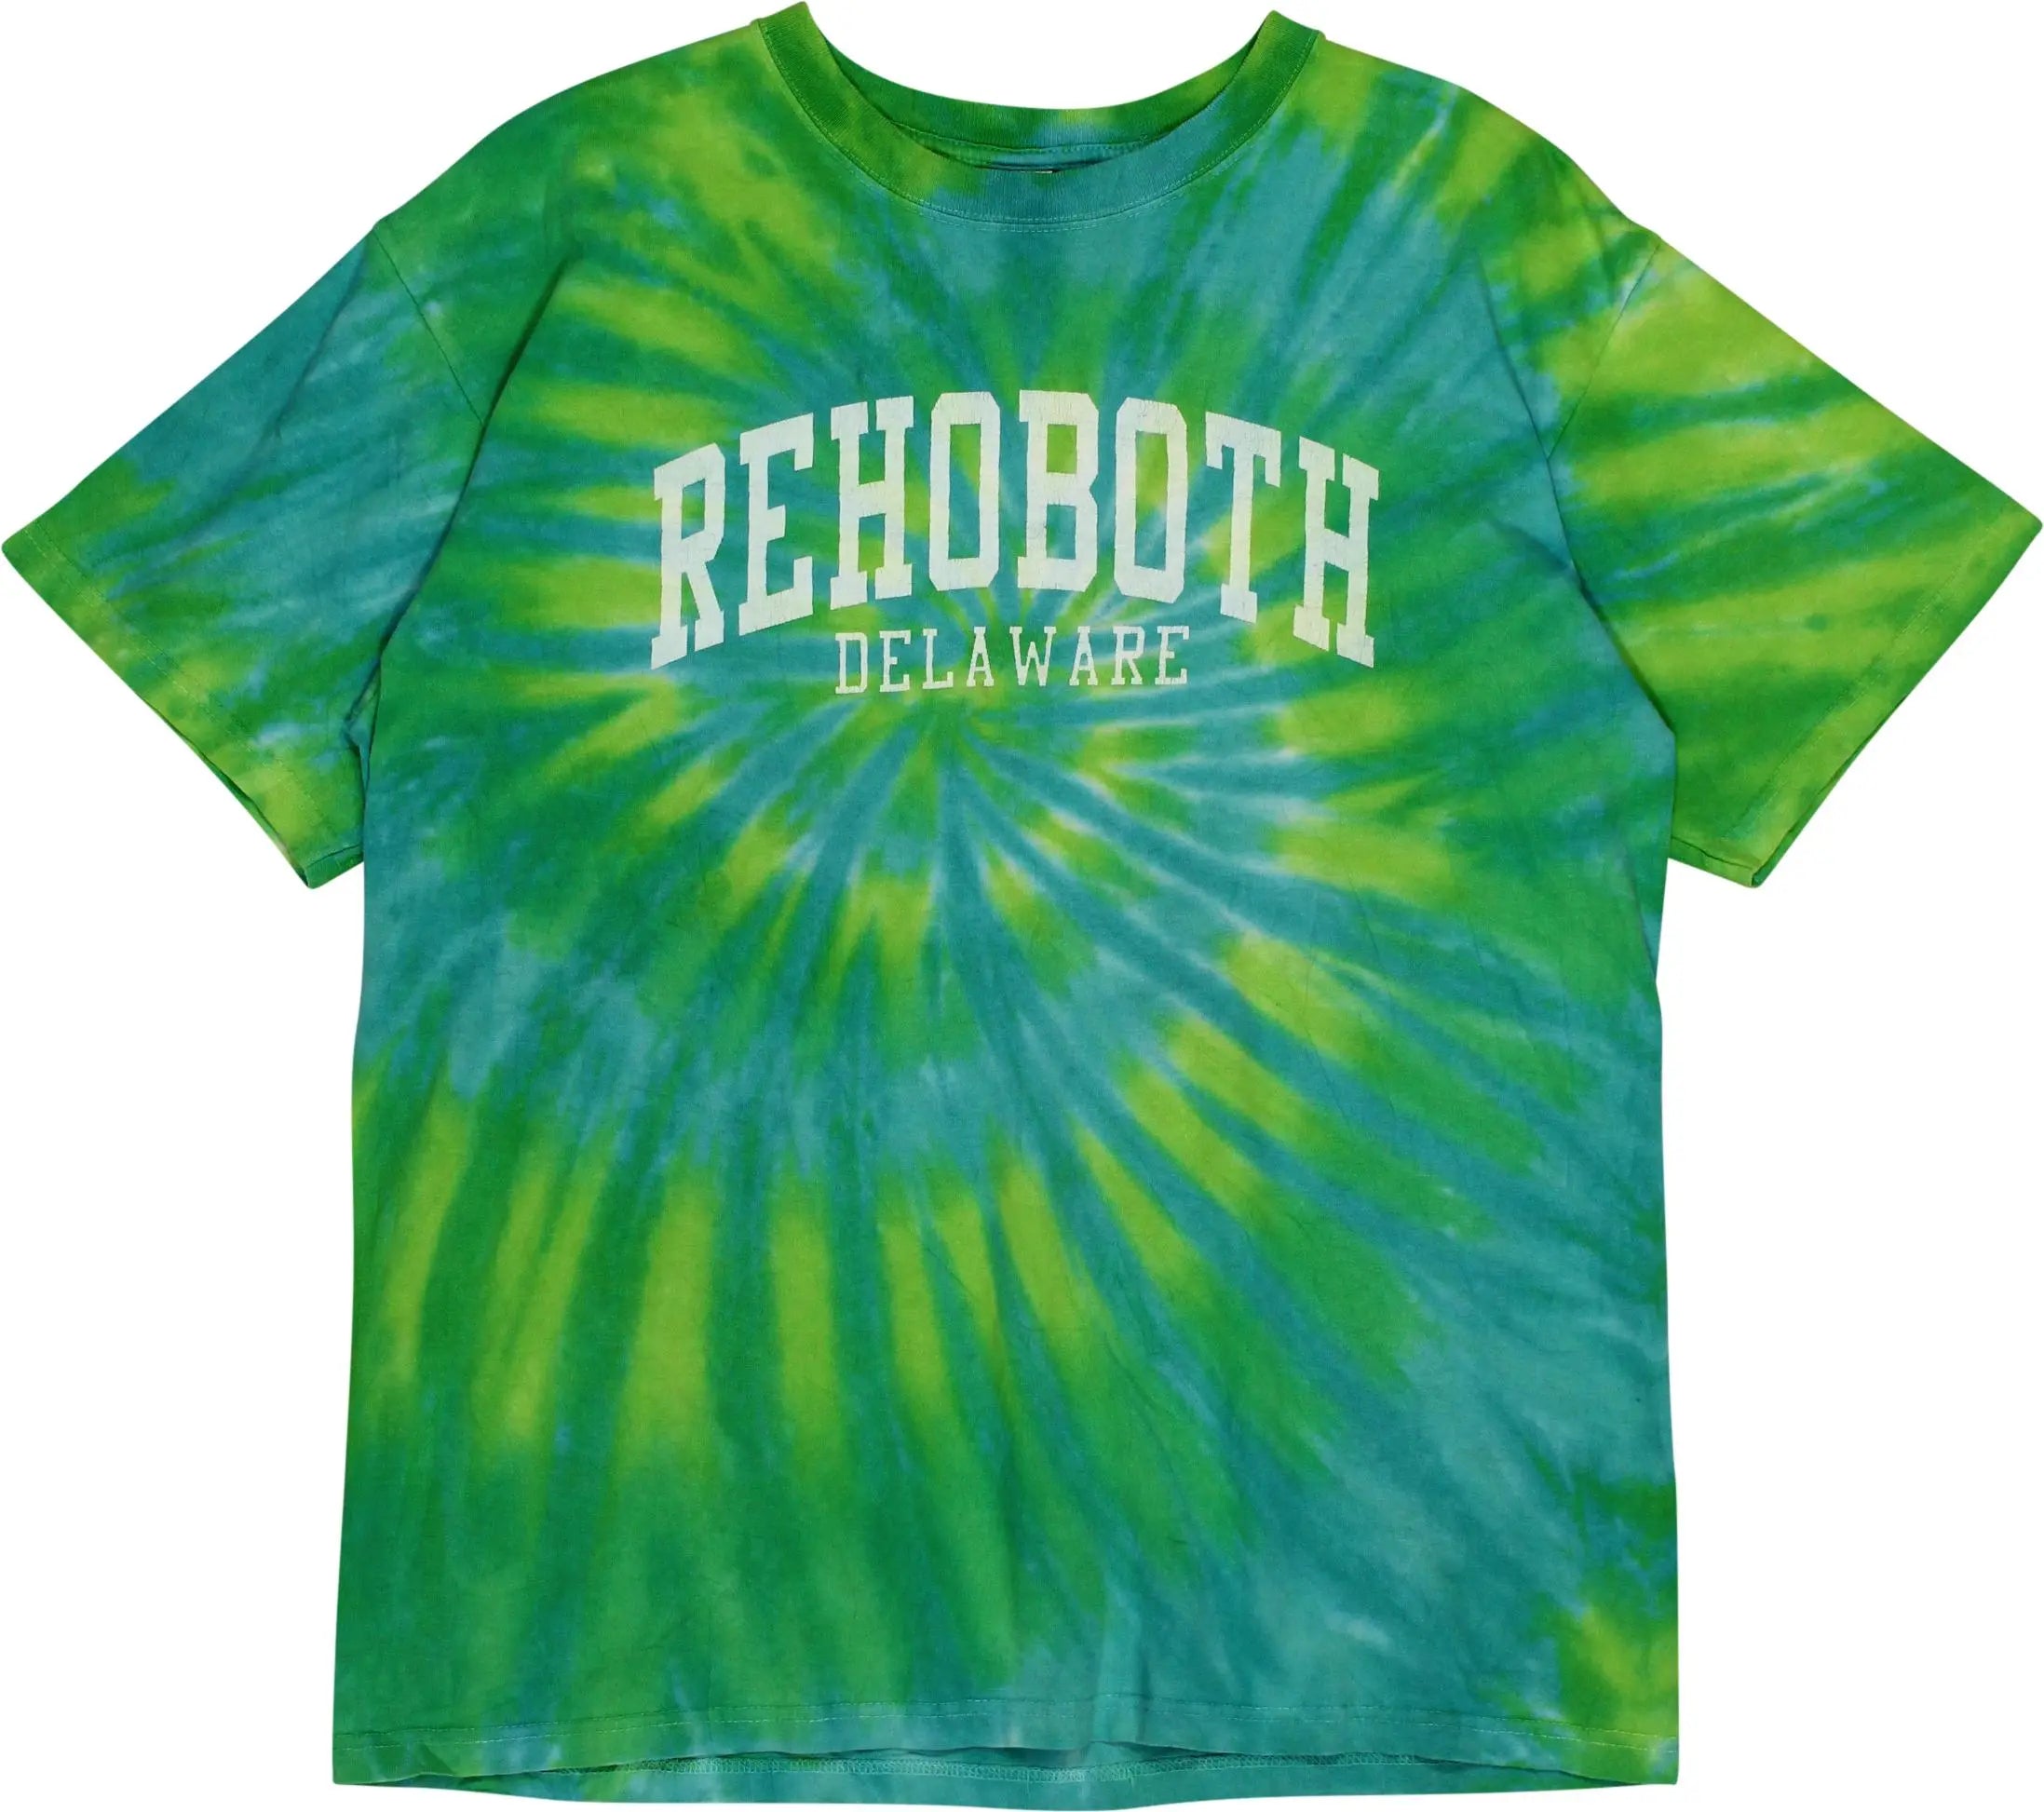 Sundog - Tie Dye T-Shirt- ThriftTale.com - Vintage and second handclothing